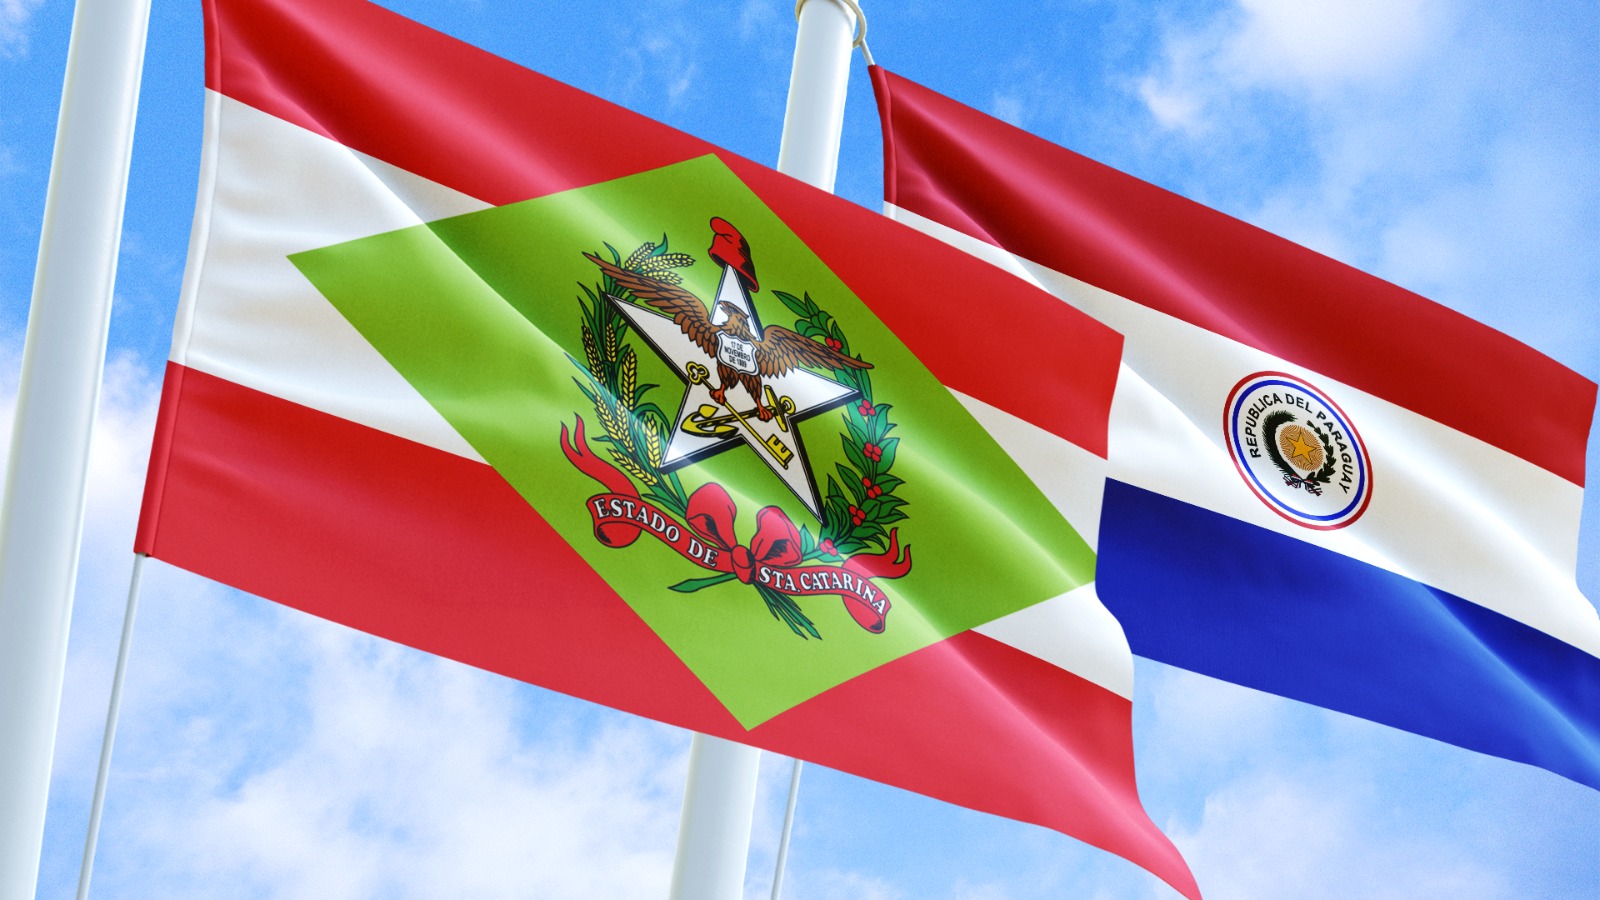 Paraguay is the next destination for the SC- Export project